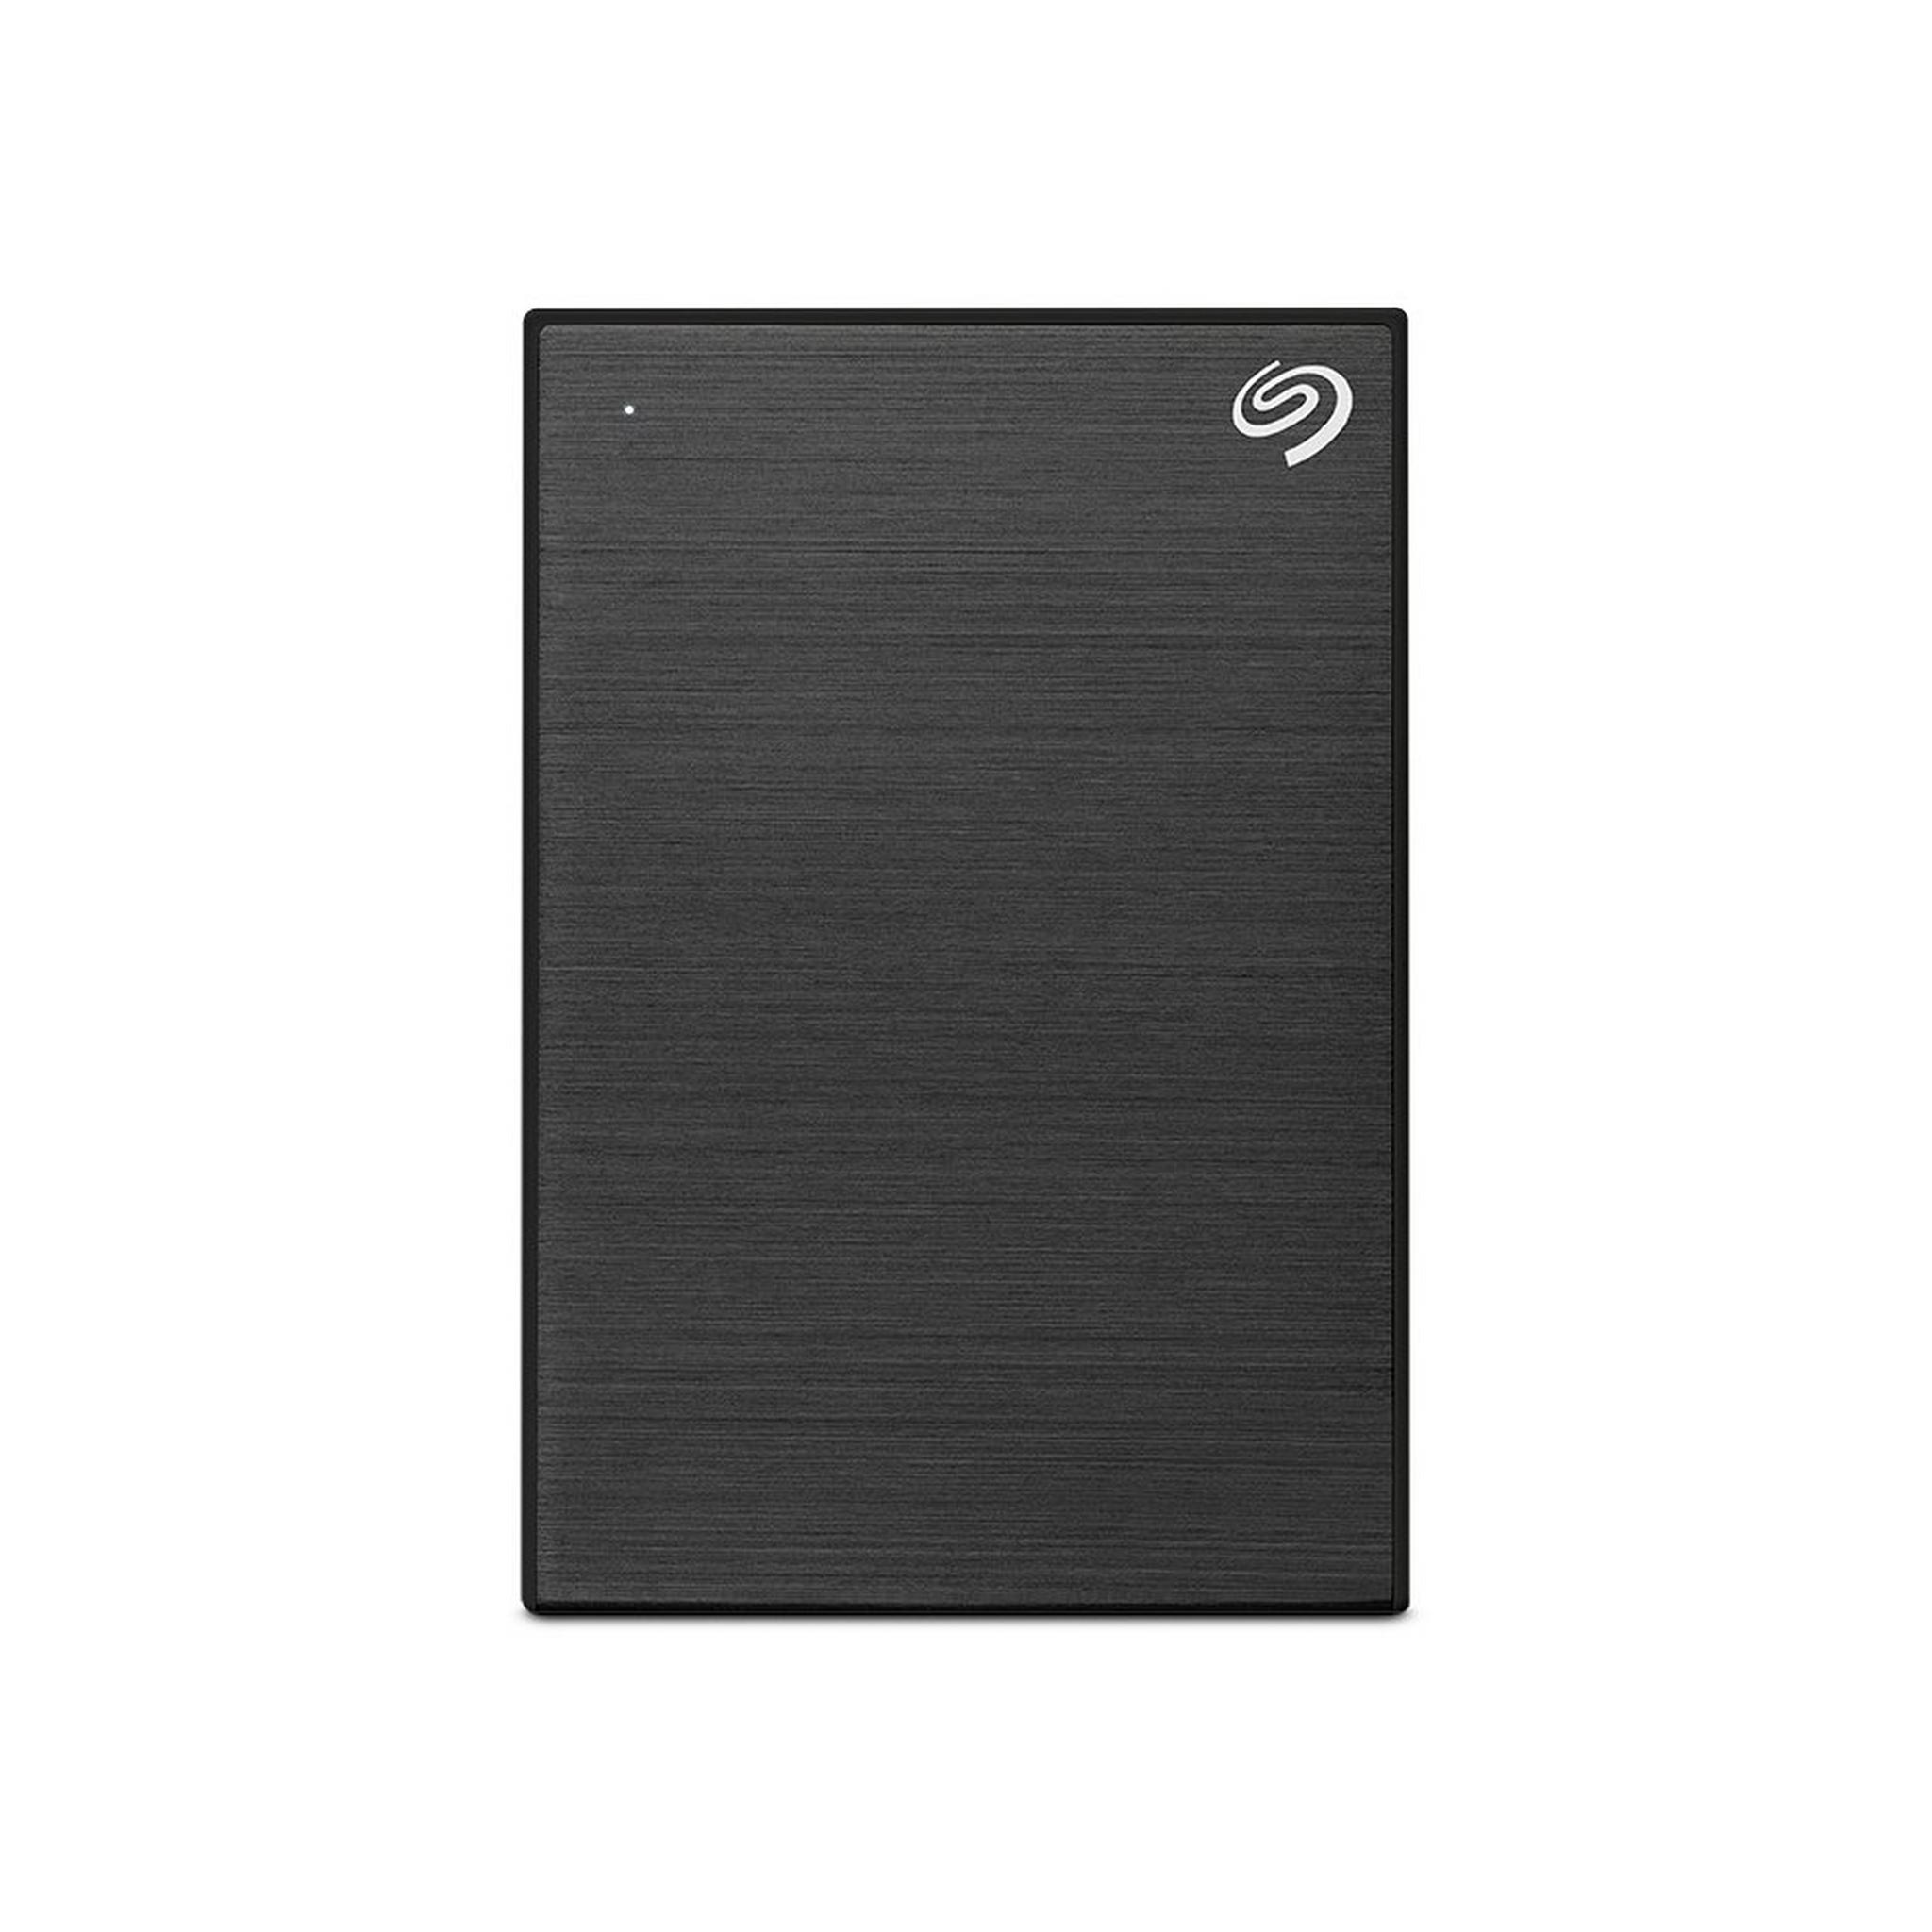 SEAGATE One Touch Portable Hard drive, 1TB HDD with Password, STKY1000400 - Black